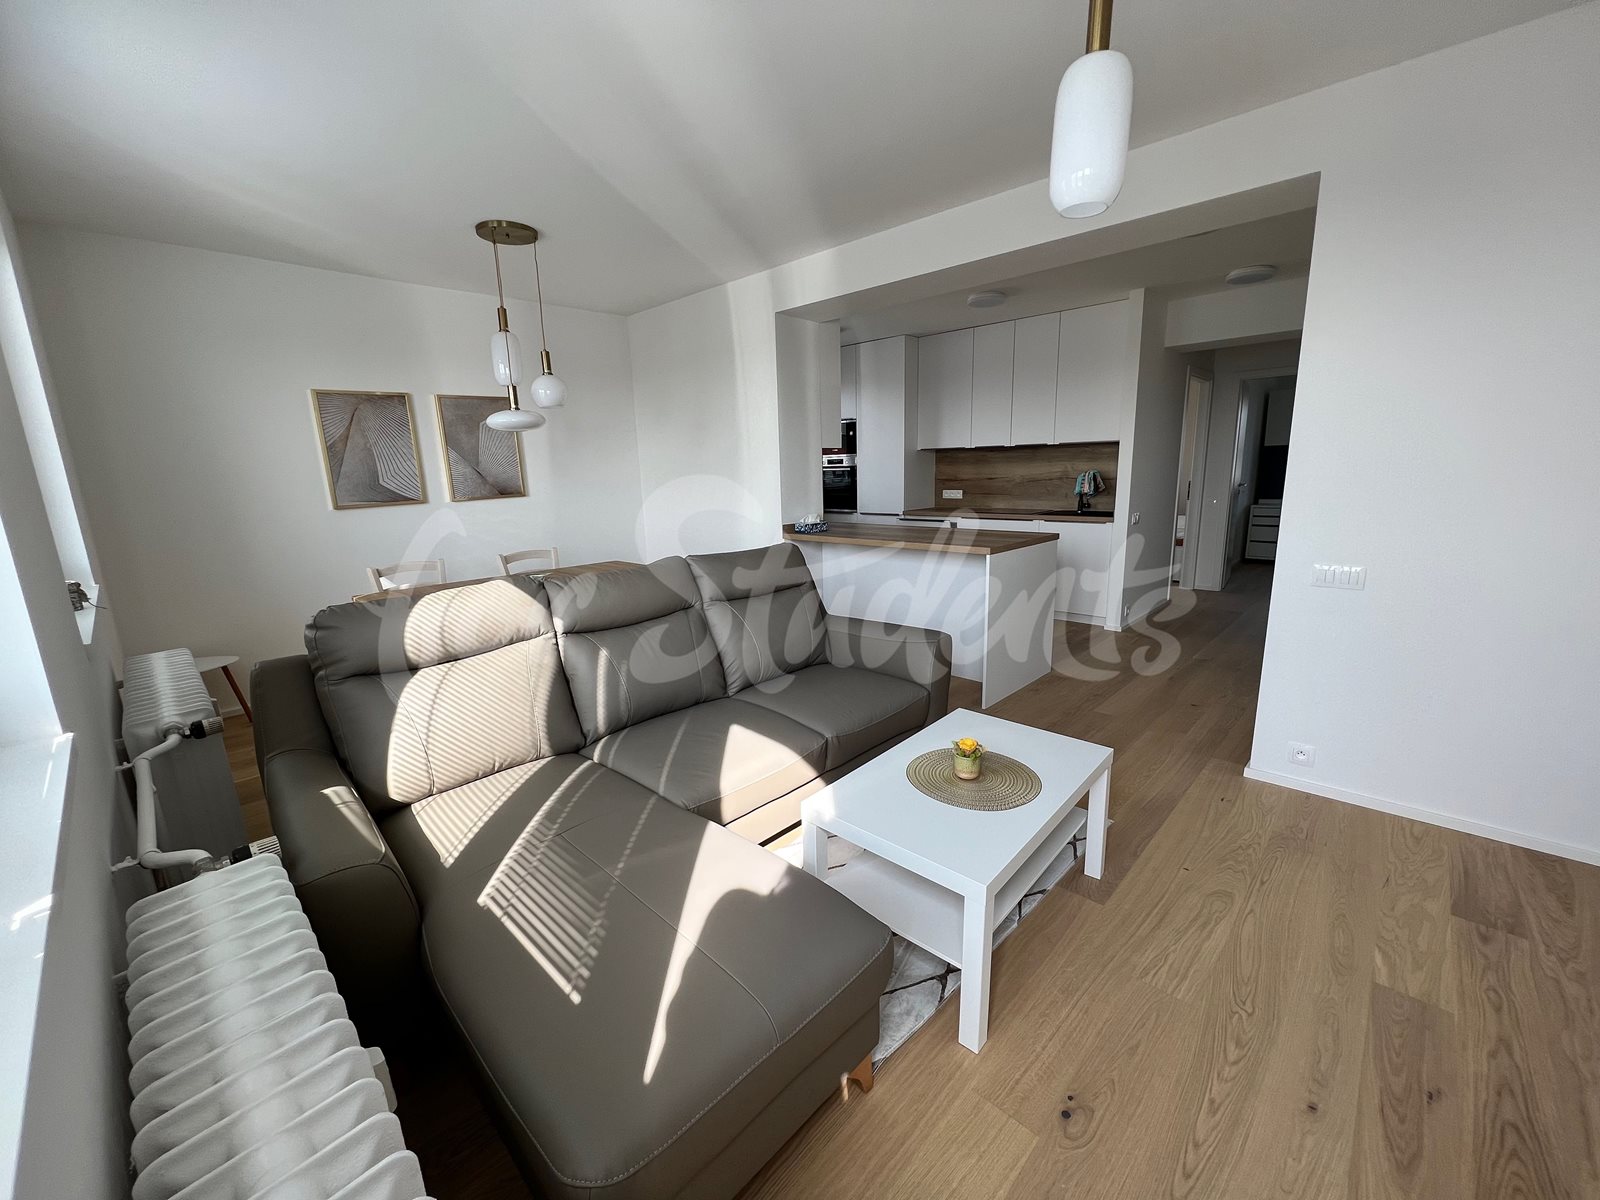 Newly reconstructed two bedroom apartment in New Town, Hradec Králové